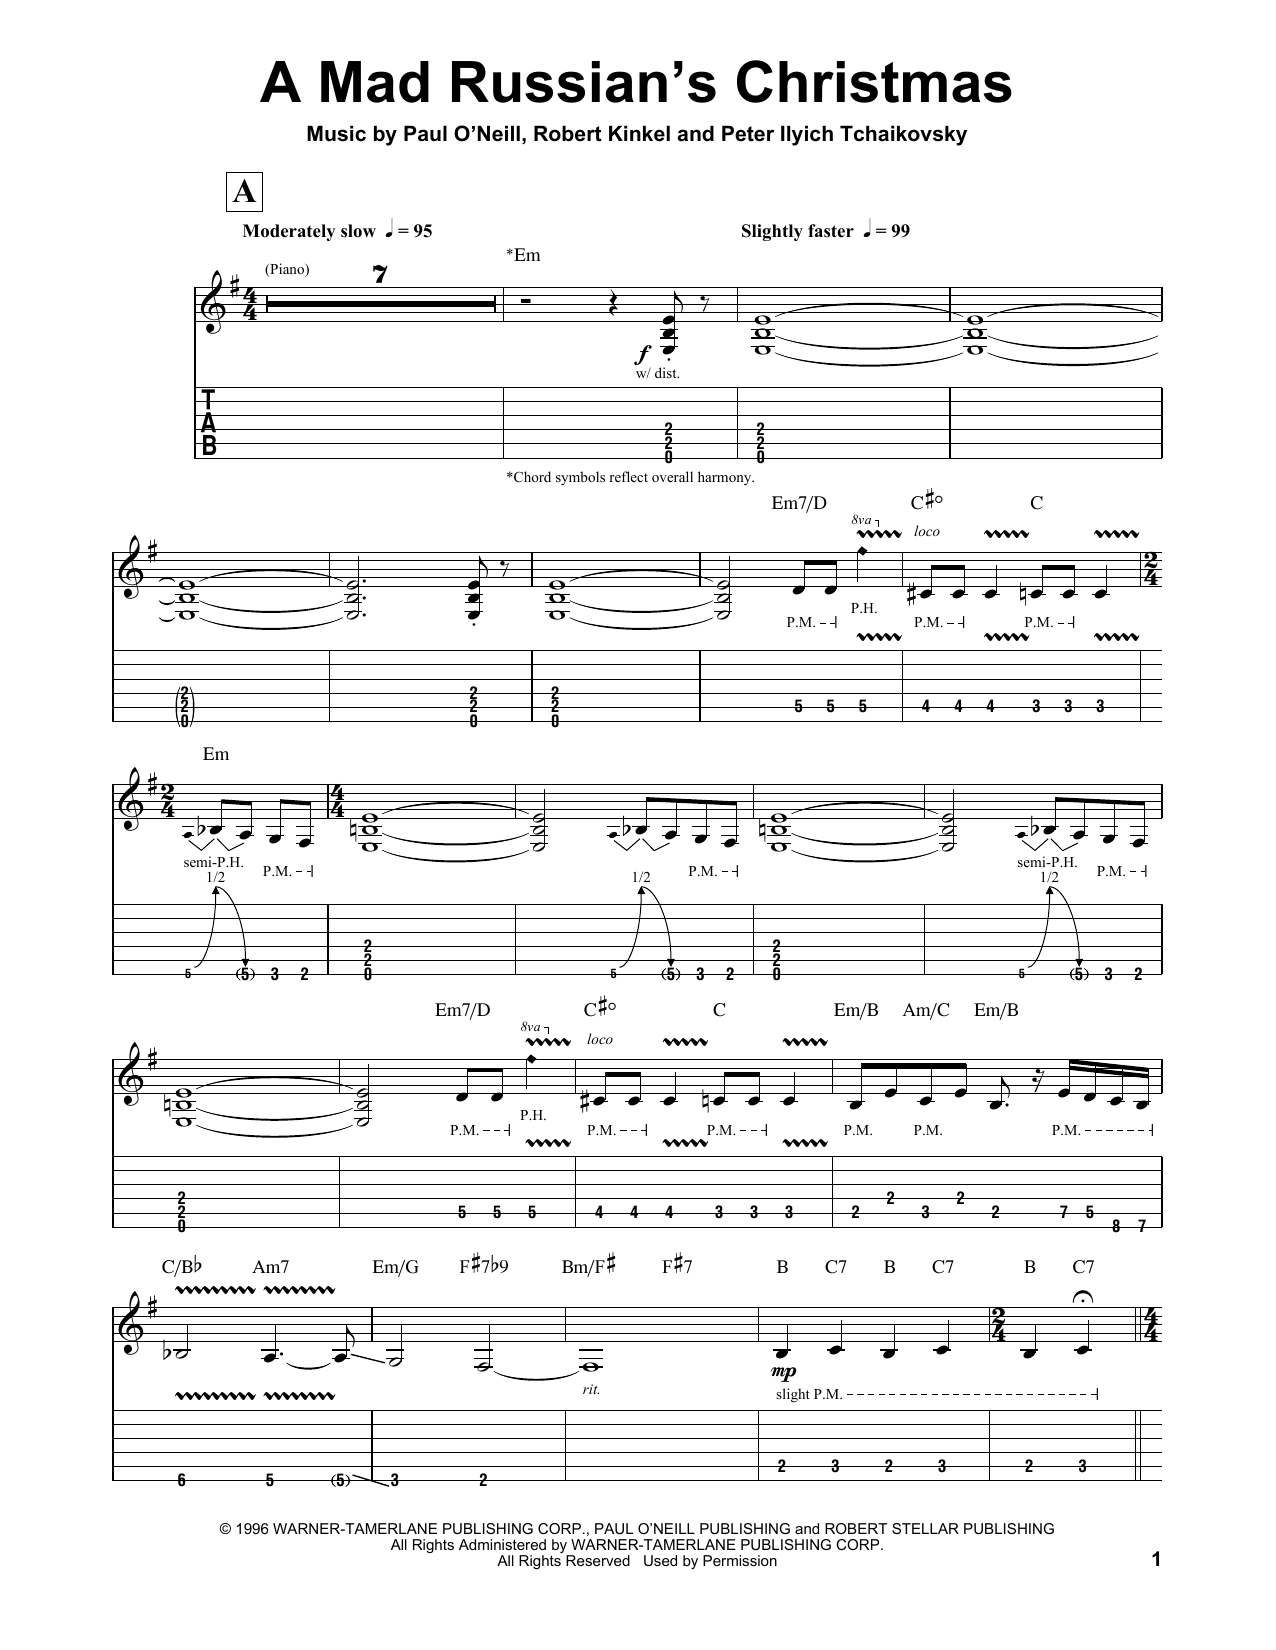 Download Trans-Siberian Orchestra A Mad Russian's Christmas Sheet Music